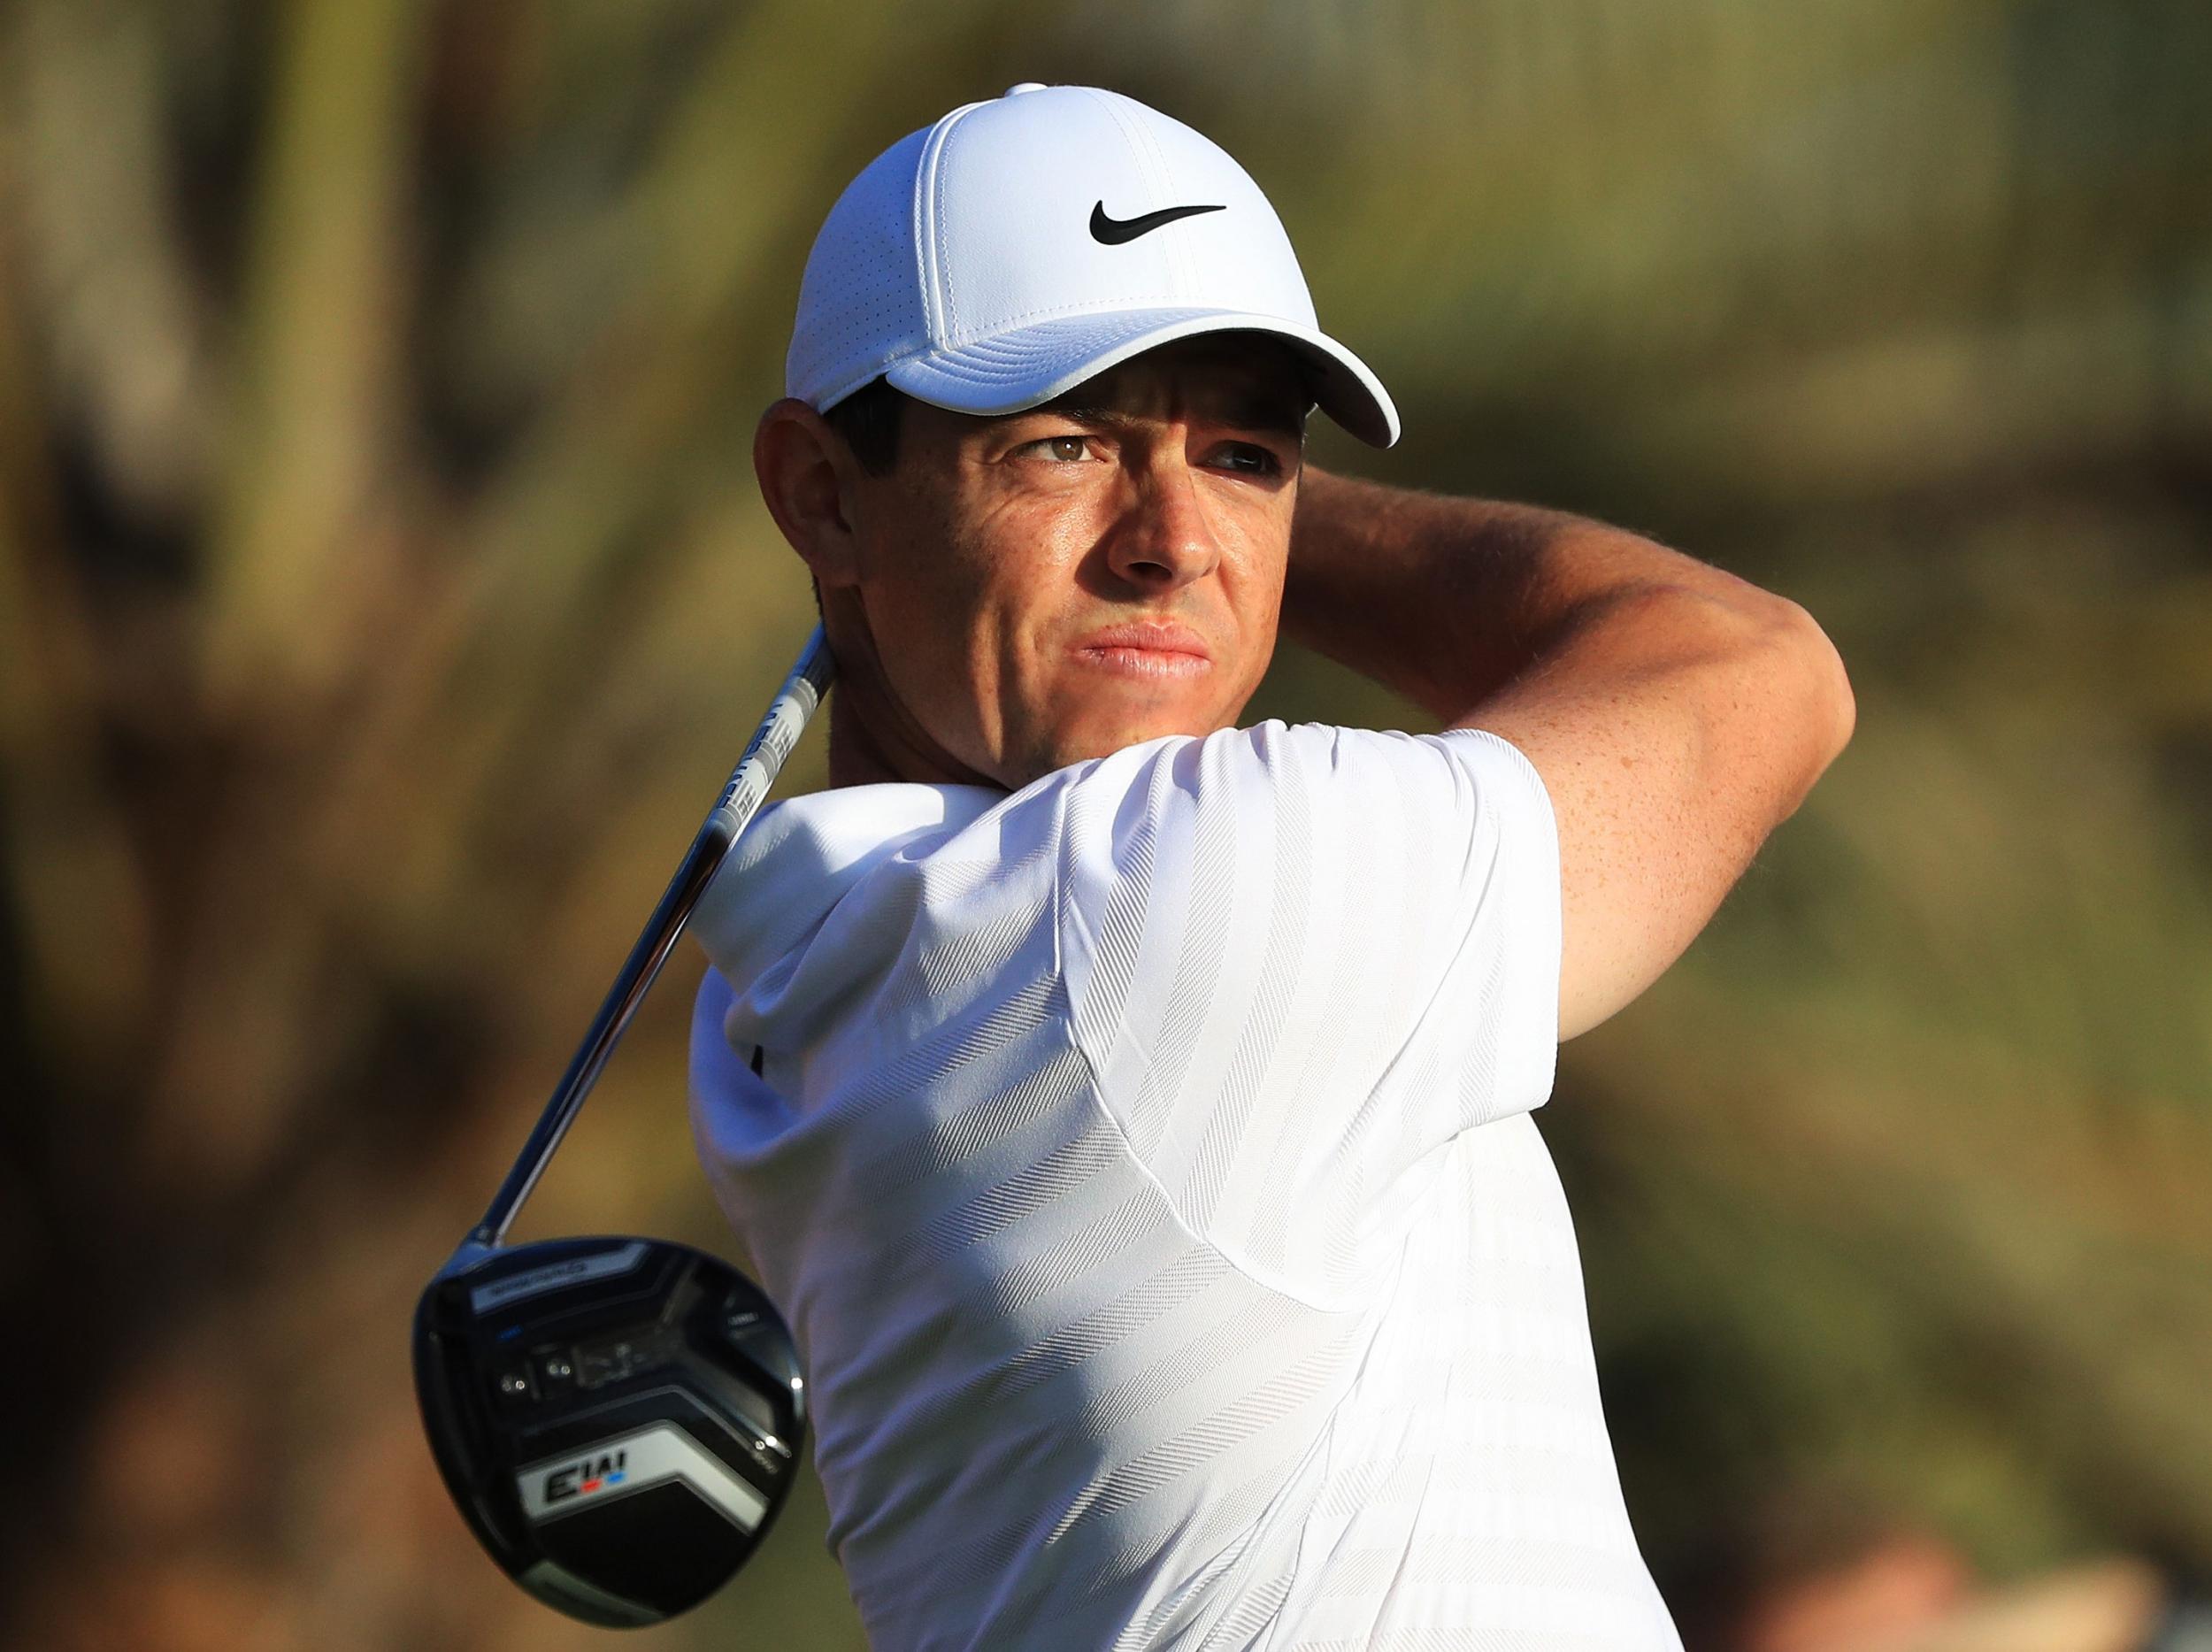 Rory McIlroy was happy to get back into competitive action in Abu Dhabi